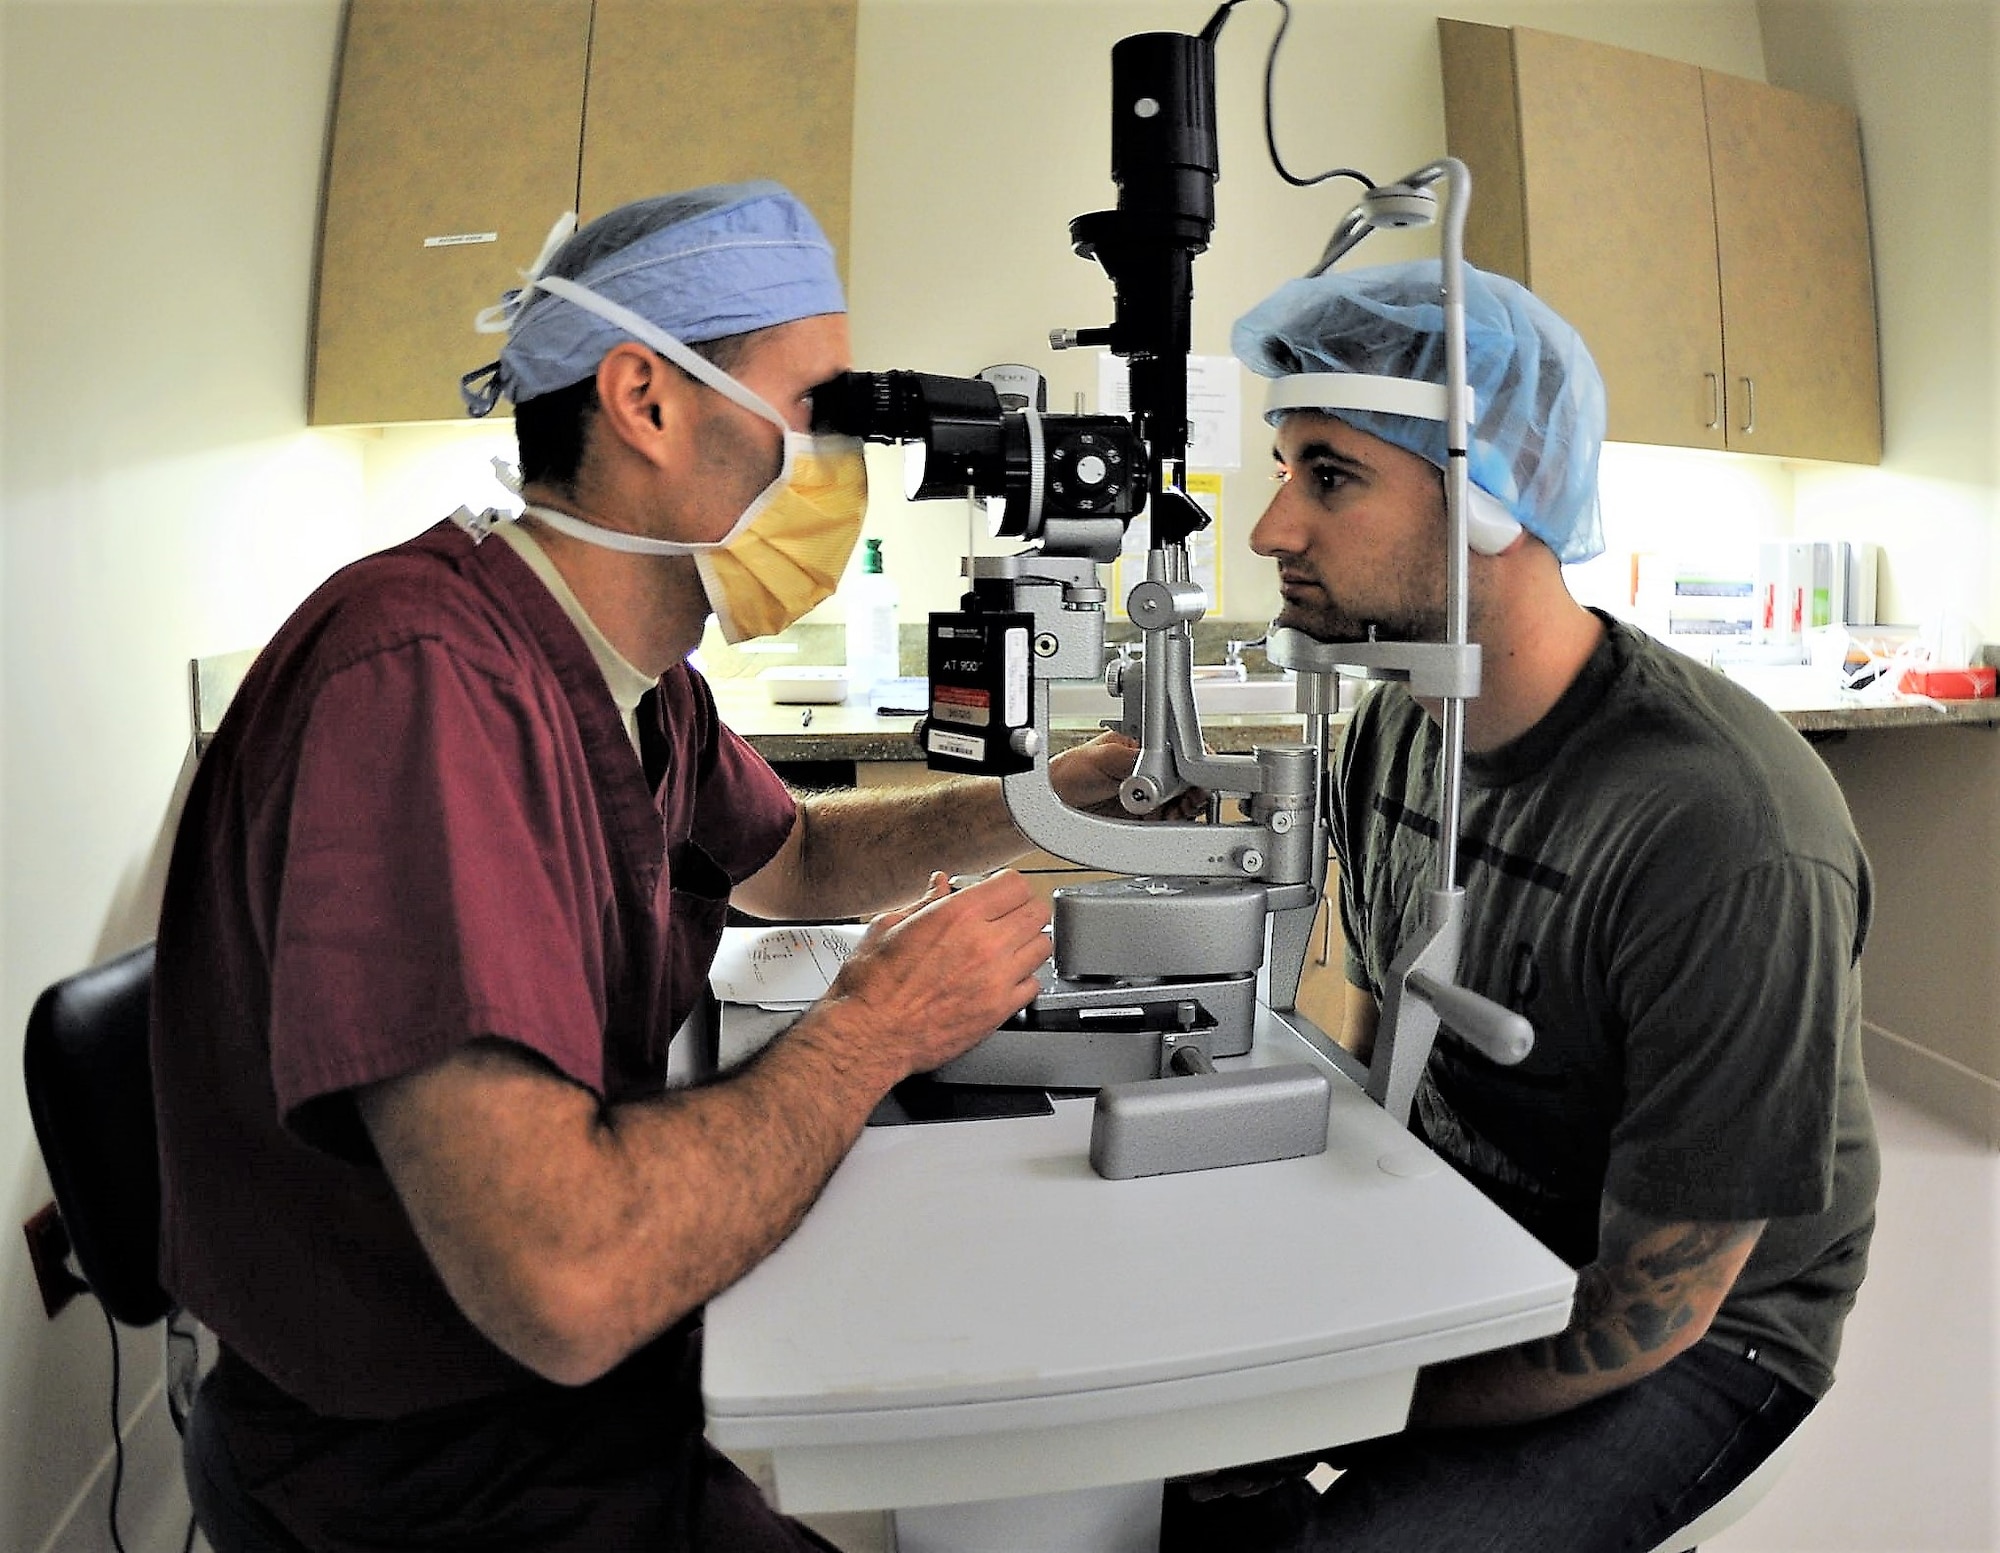 Maj. Williams Gensheimer (left), 779th Medical Group’s Warfighter Eye Center chief, inspects the corneas of Staff Sgt. John Scacca, 633rd Medical Group, Joint Base Langley-Eustis, Va., before performing corneal refractive surgery May 17, 2017 at Joint Base Andrews, Md. PRK, LASIK and other types of laser eye surgery involve using an excimer laser to re-shape the cornea, which allows for light to enter the eye that is properly focused onto the retina for improved vision. (U.S. Air Force photo by Joe Yanik)